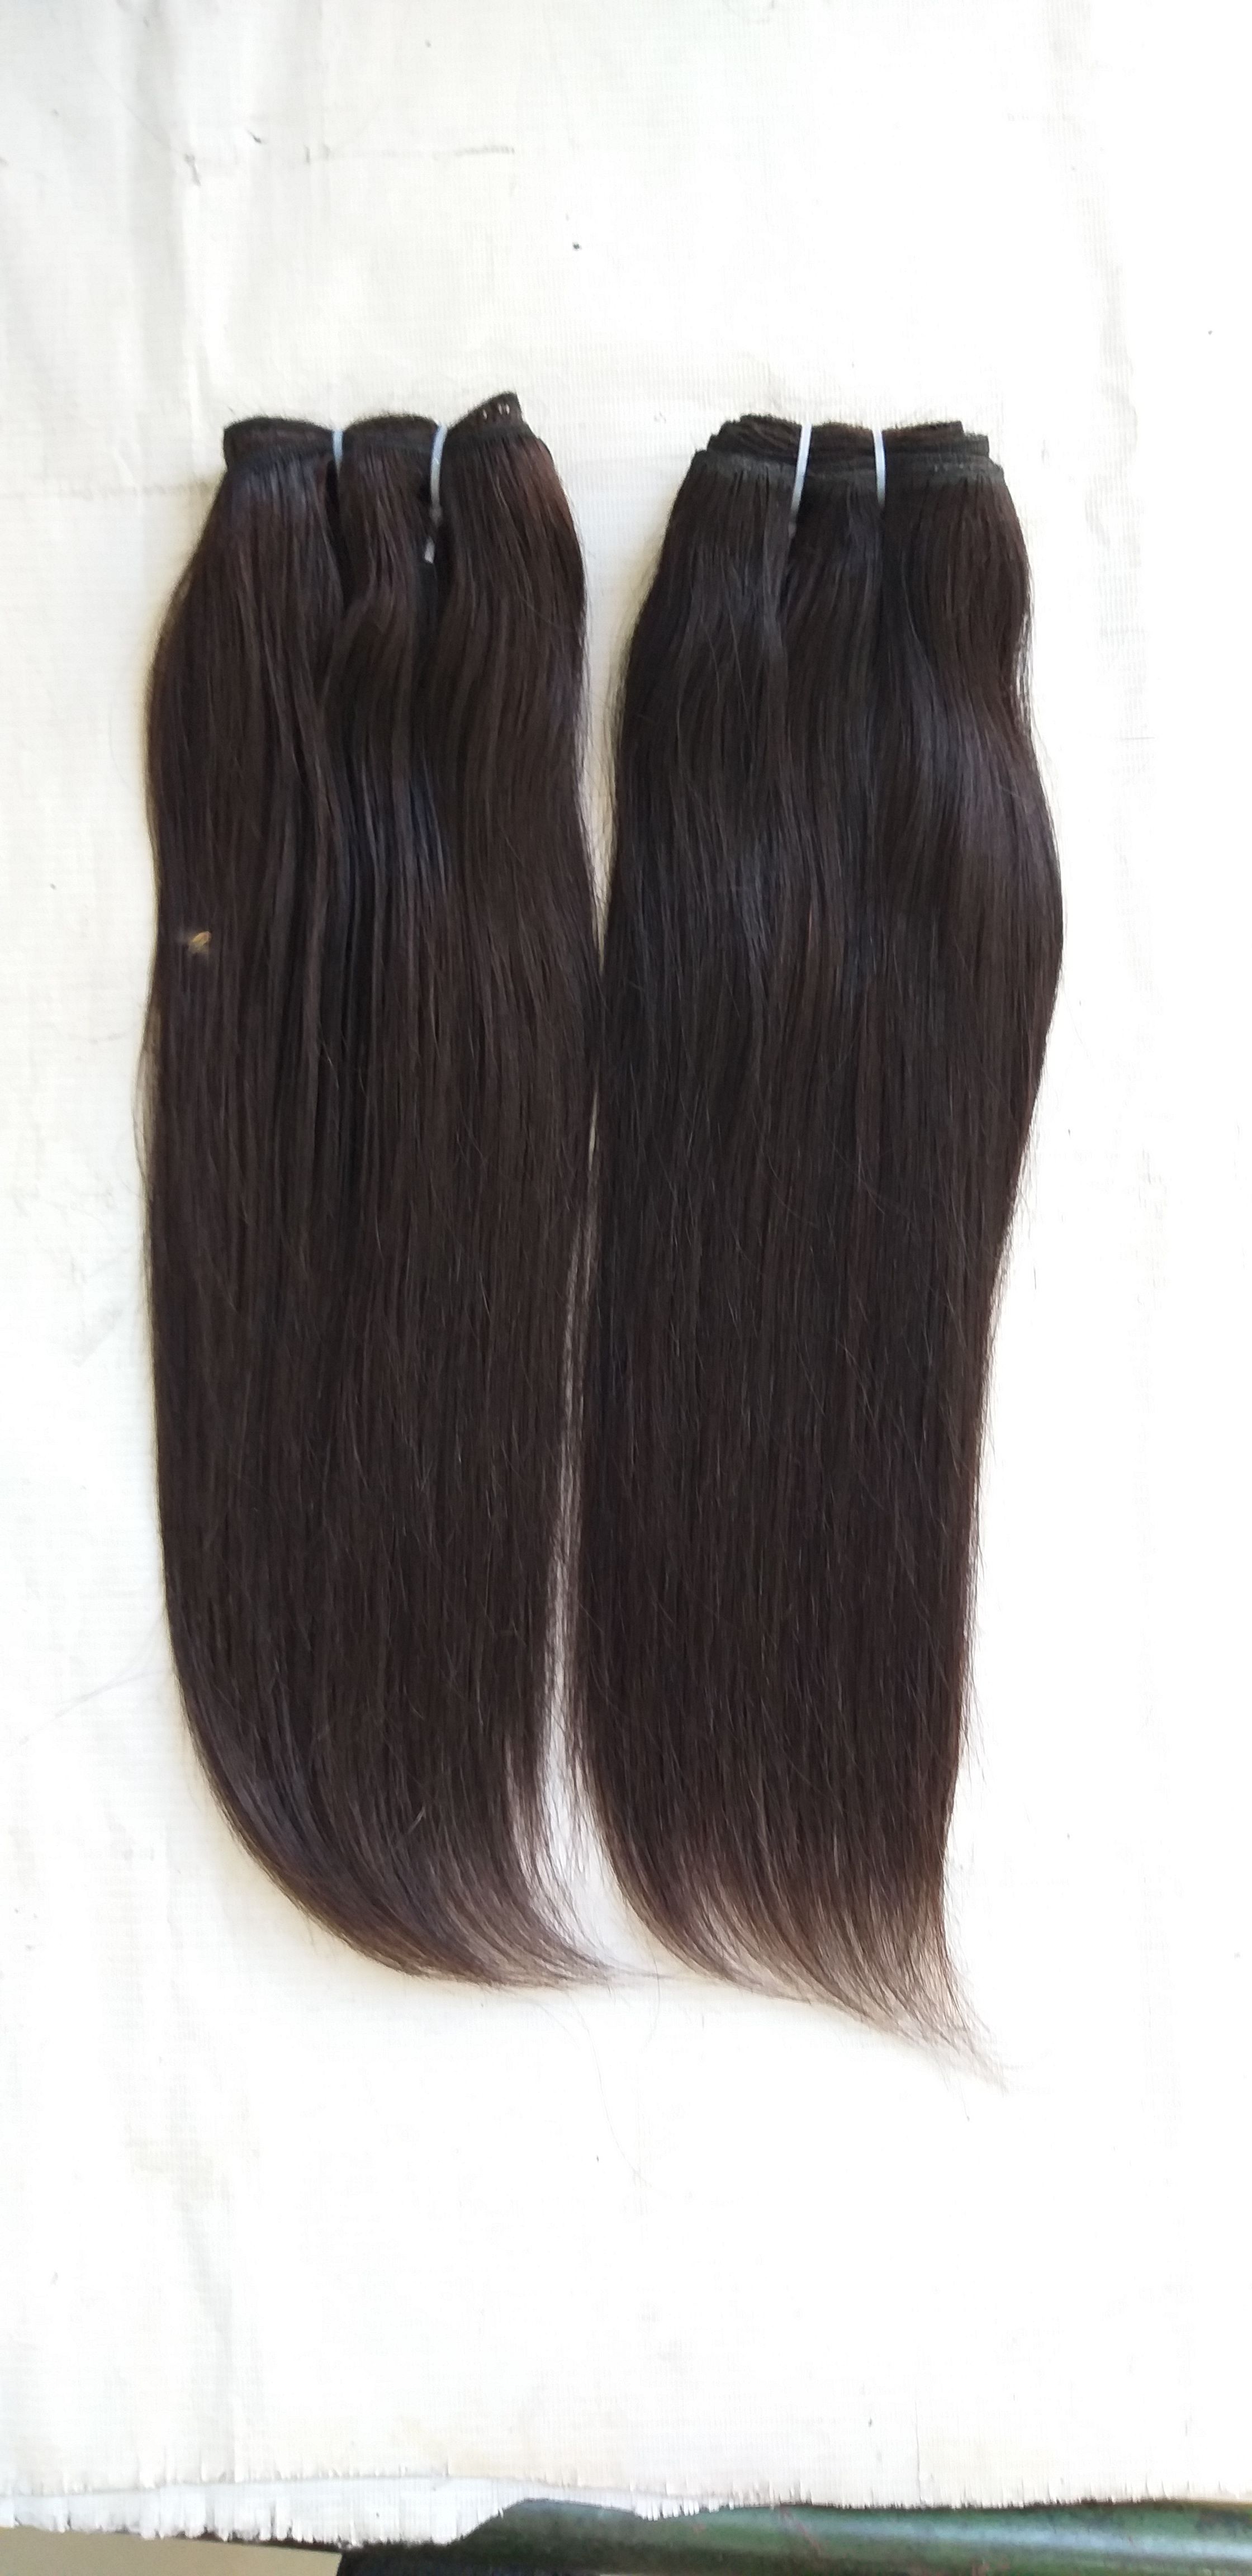 Single Drawn Natural Straight Double Machine Best Hair Extensions